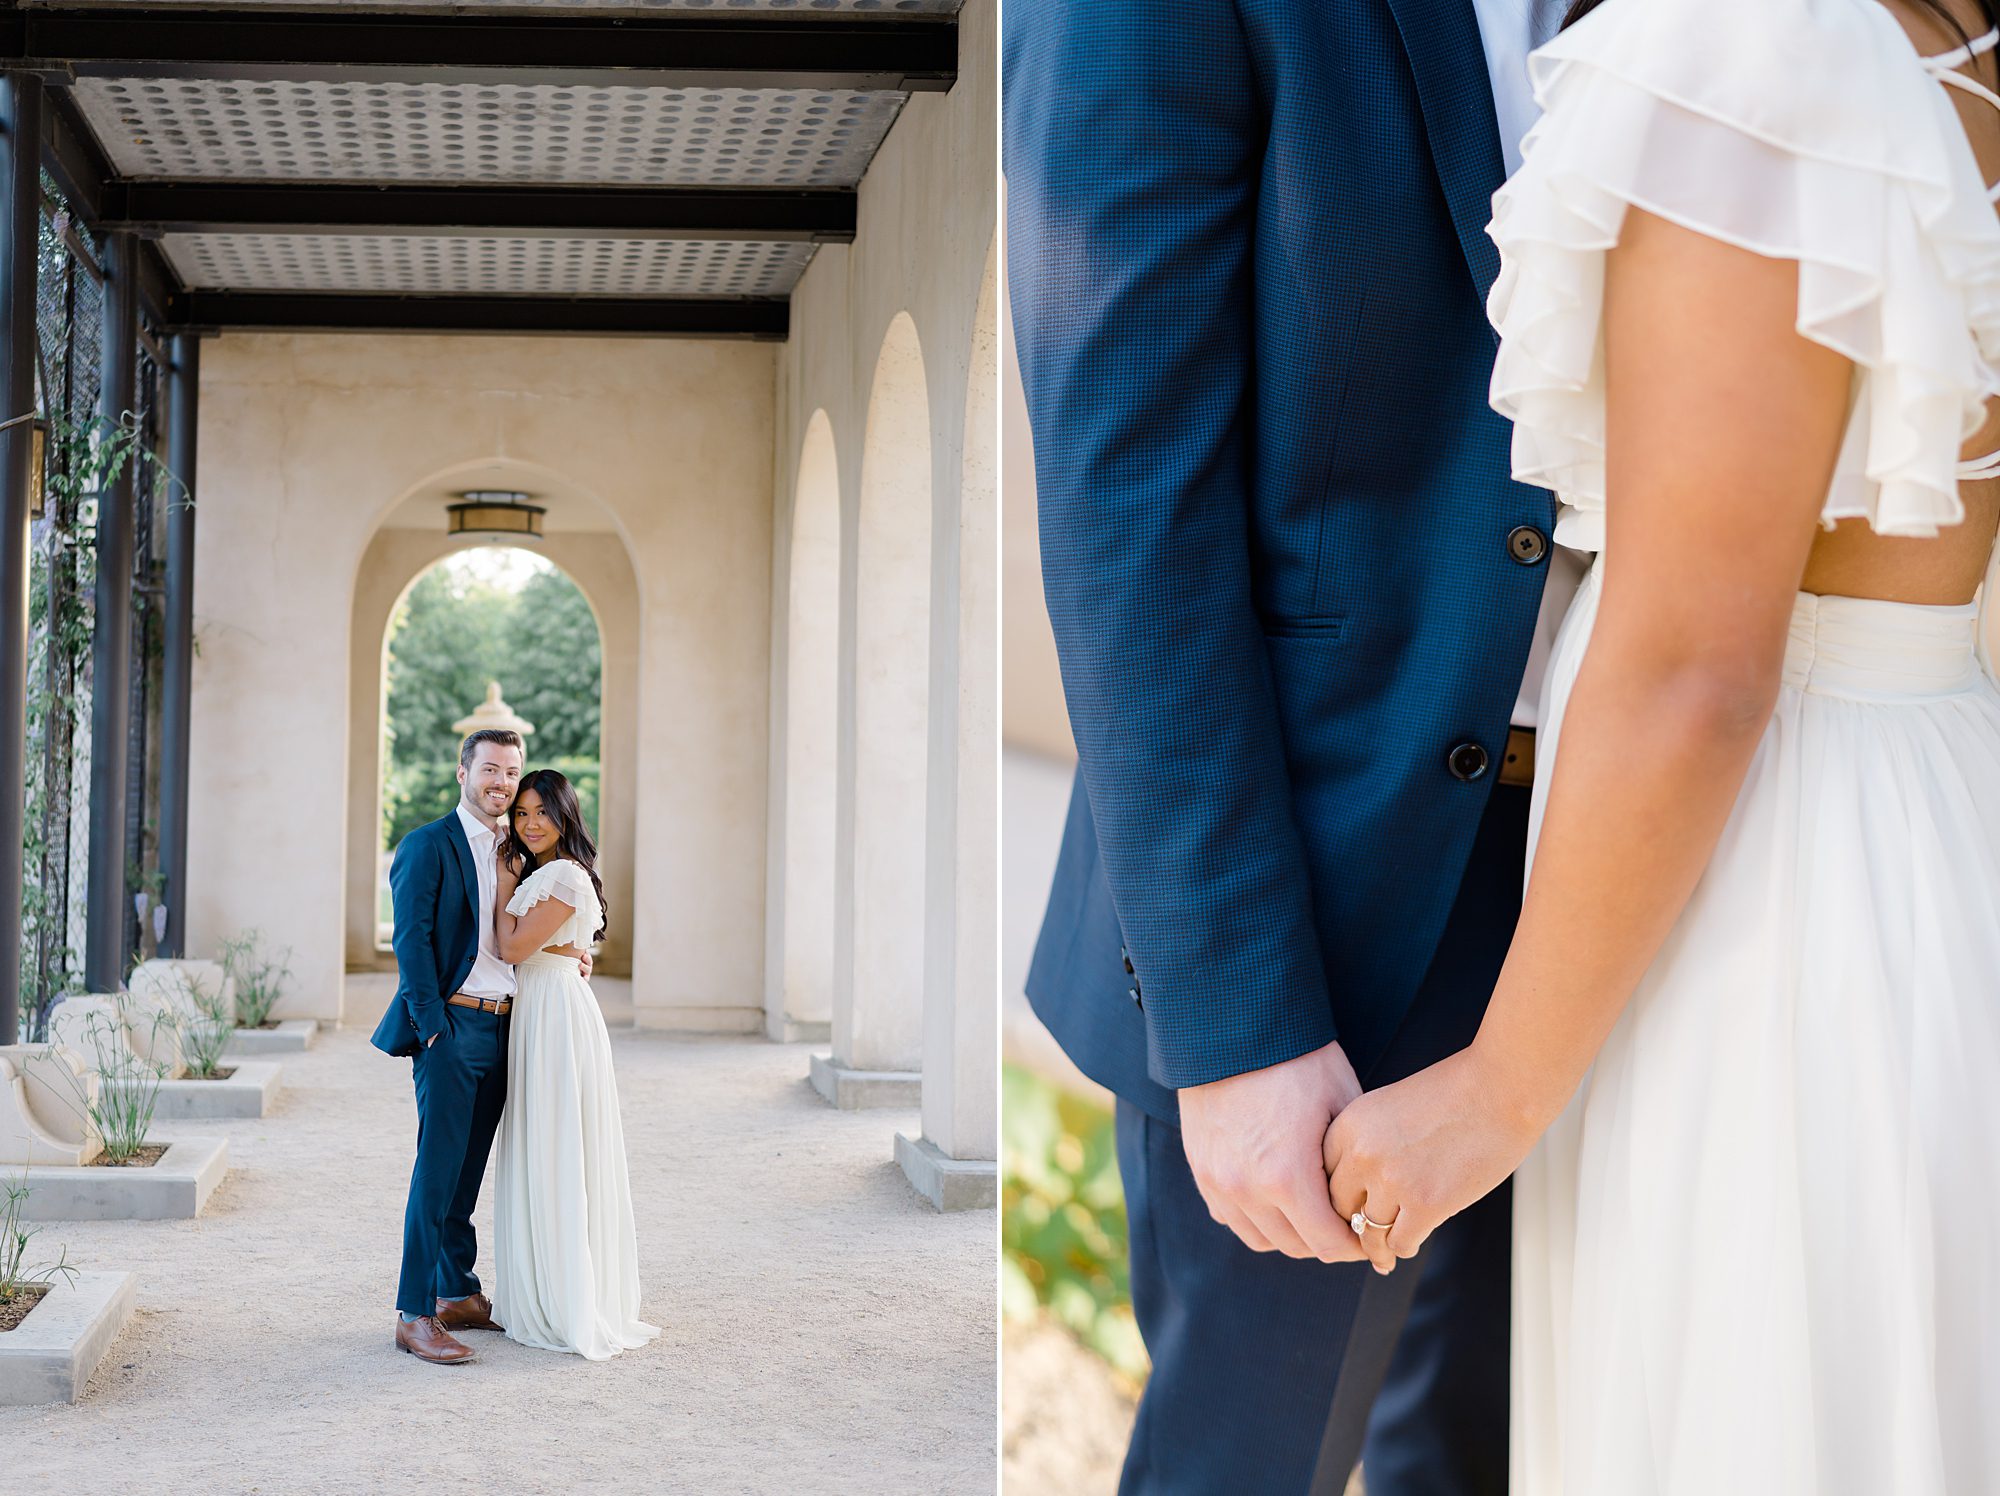 Capturing Timeless Engagement Photos and avoiding cheesy portraits